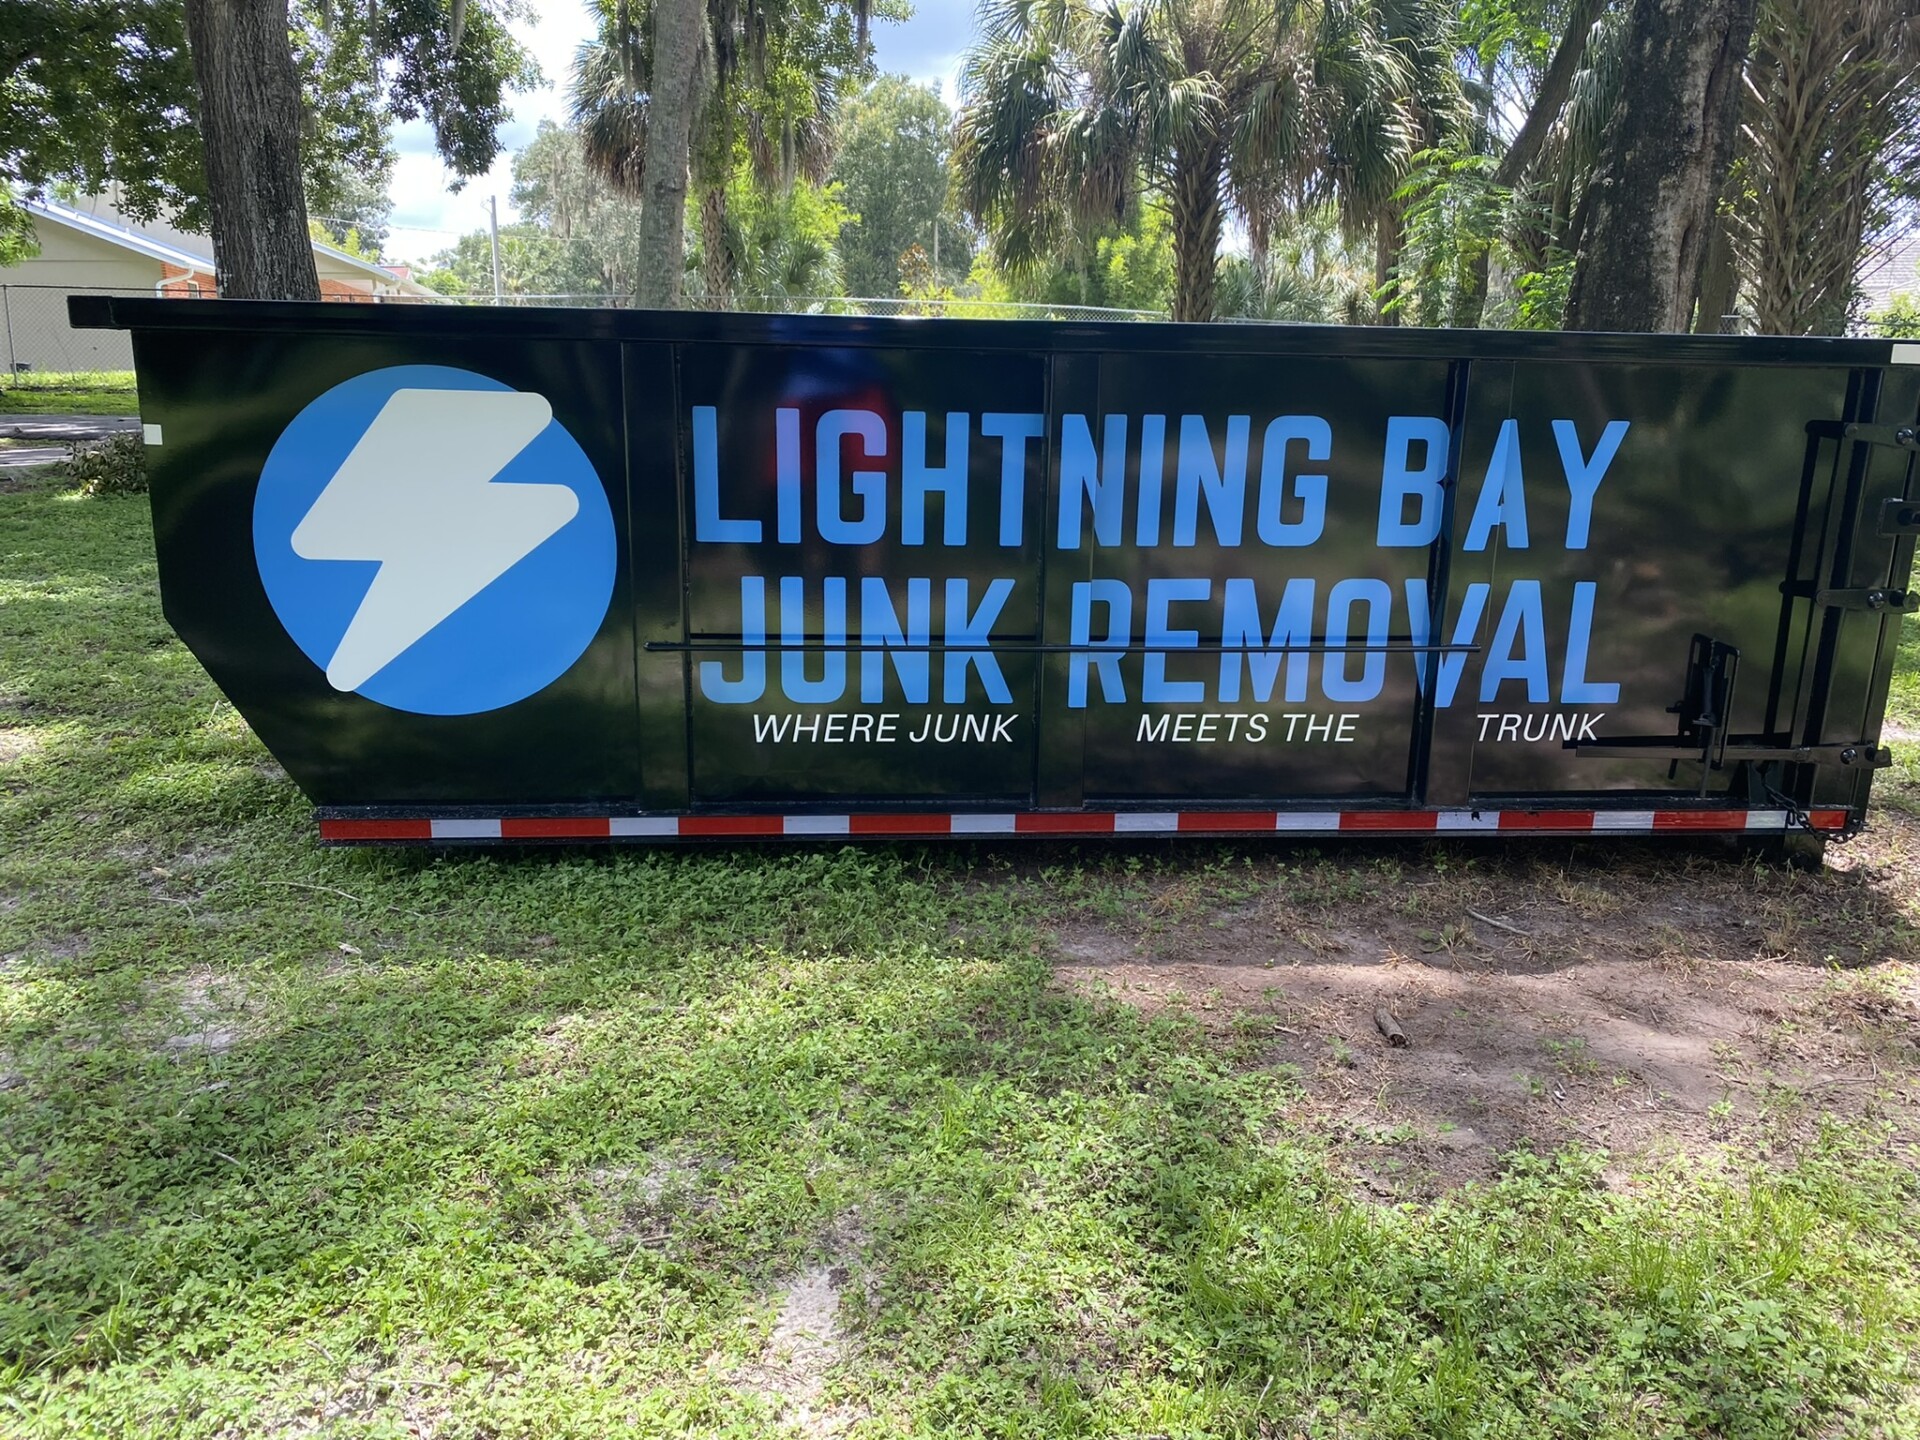 Lightning Bay Junk Removal is now offering dumpster rentals! We have a 15 yard dumpster and a 21 yard dumpster to rent! Give us a call or text us today at (813) 217-2219 to rent a dumpster today!